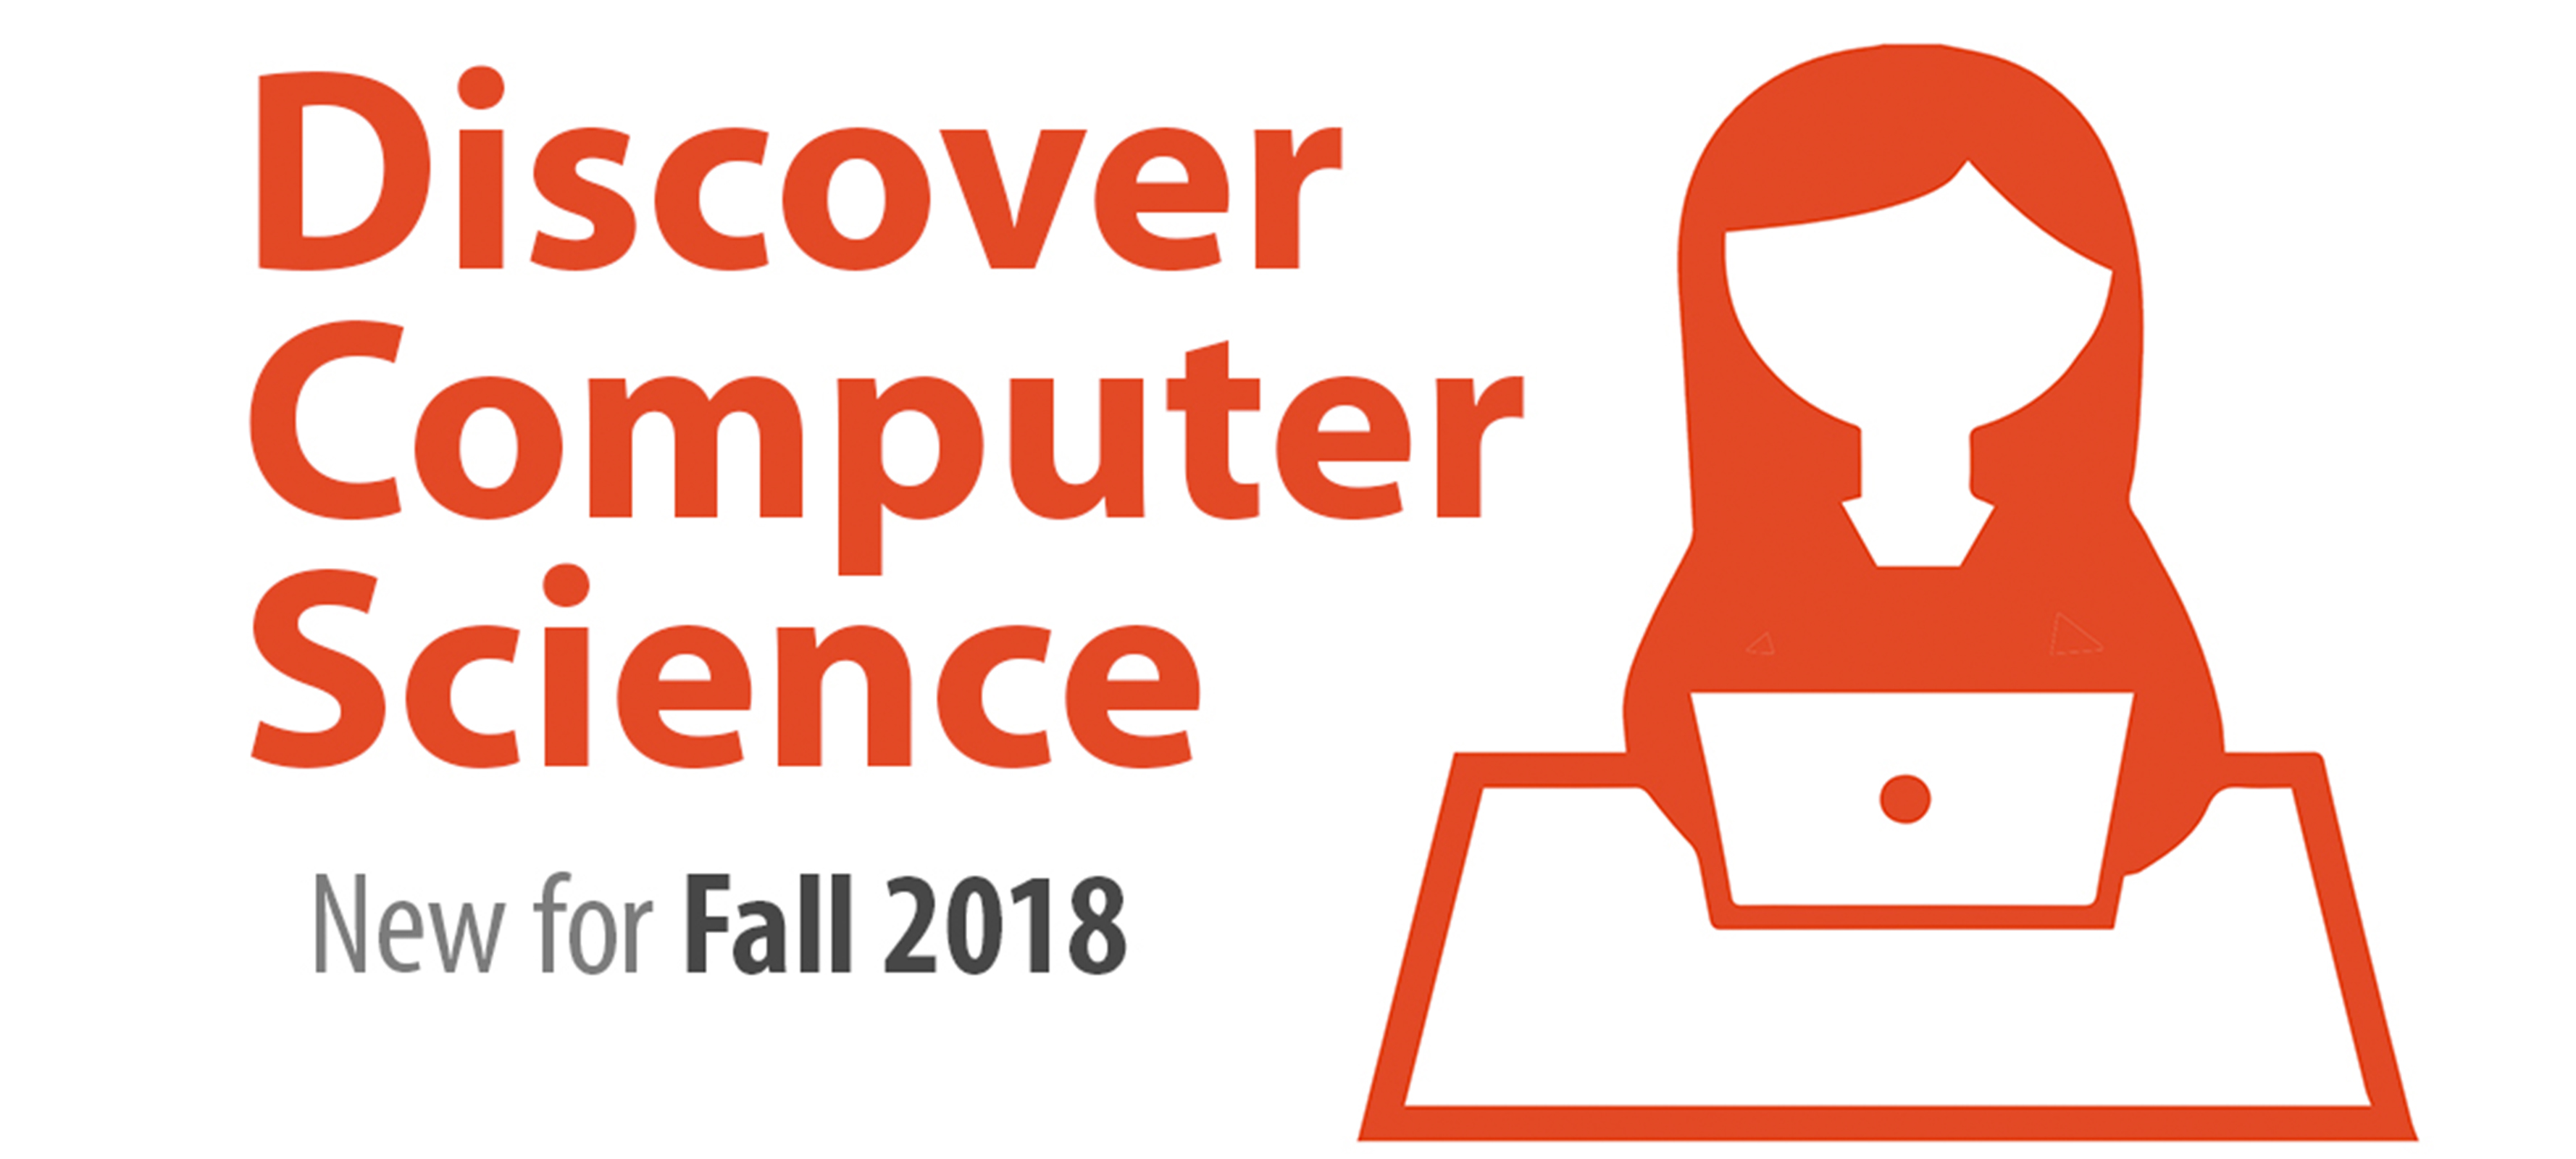 Discover Computer Science